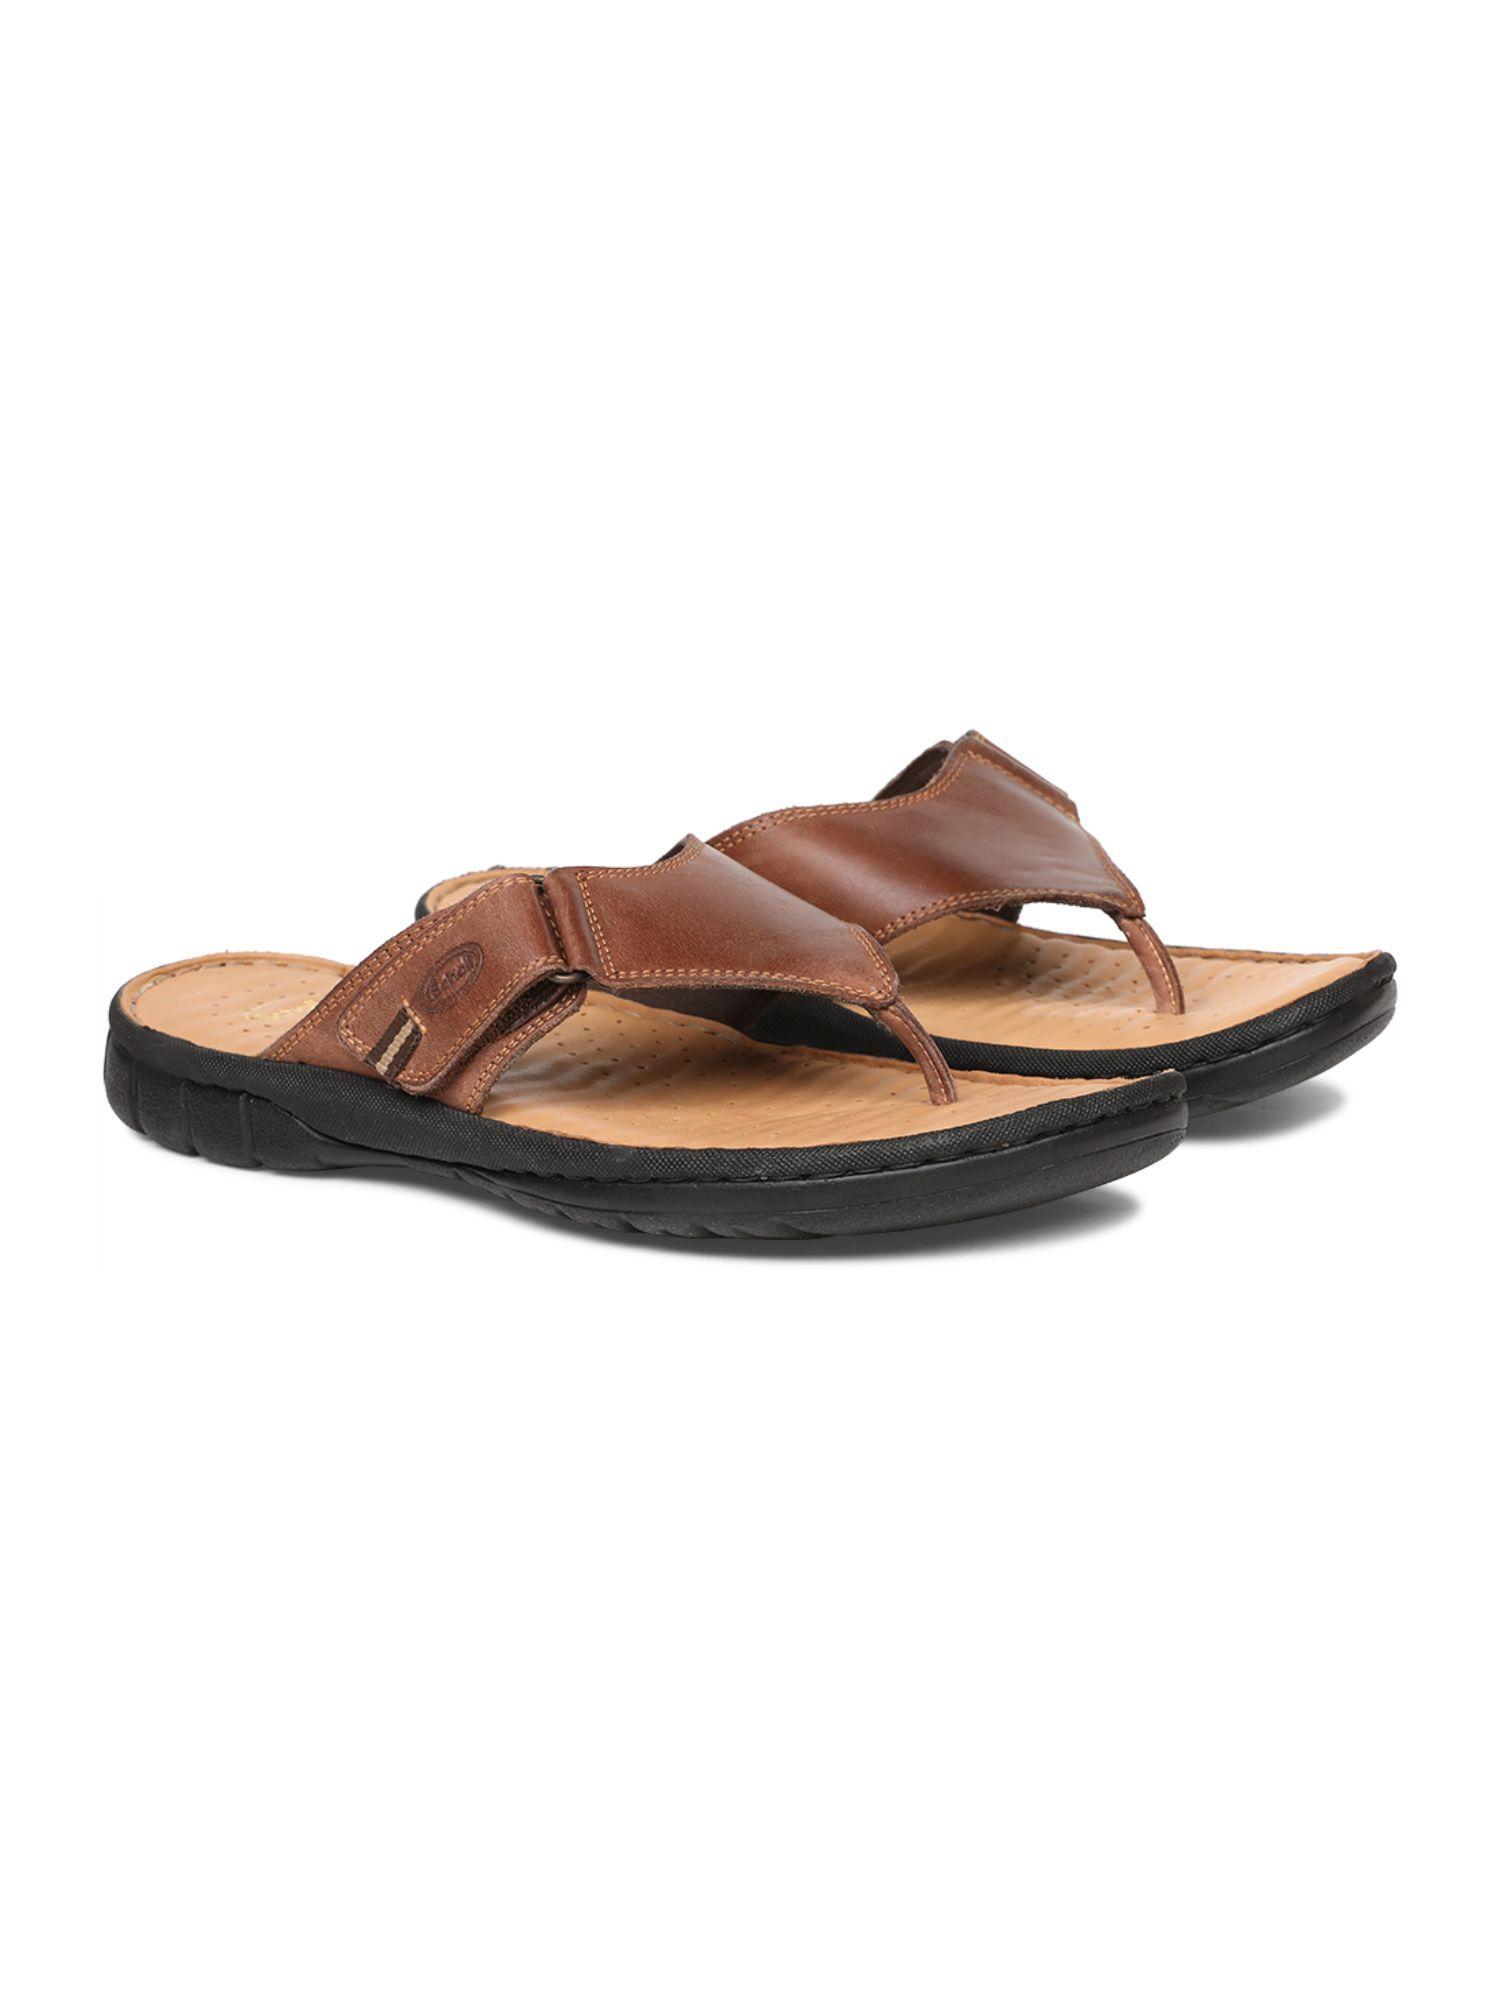 Mens Brown Slip On Casual Sandals